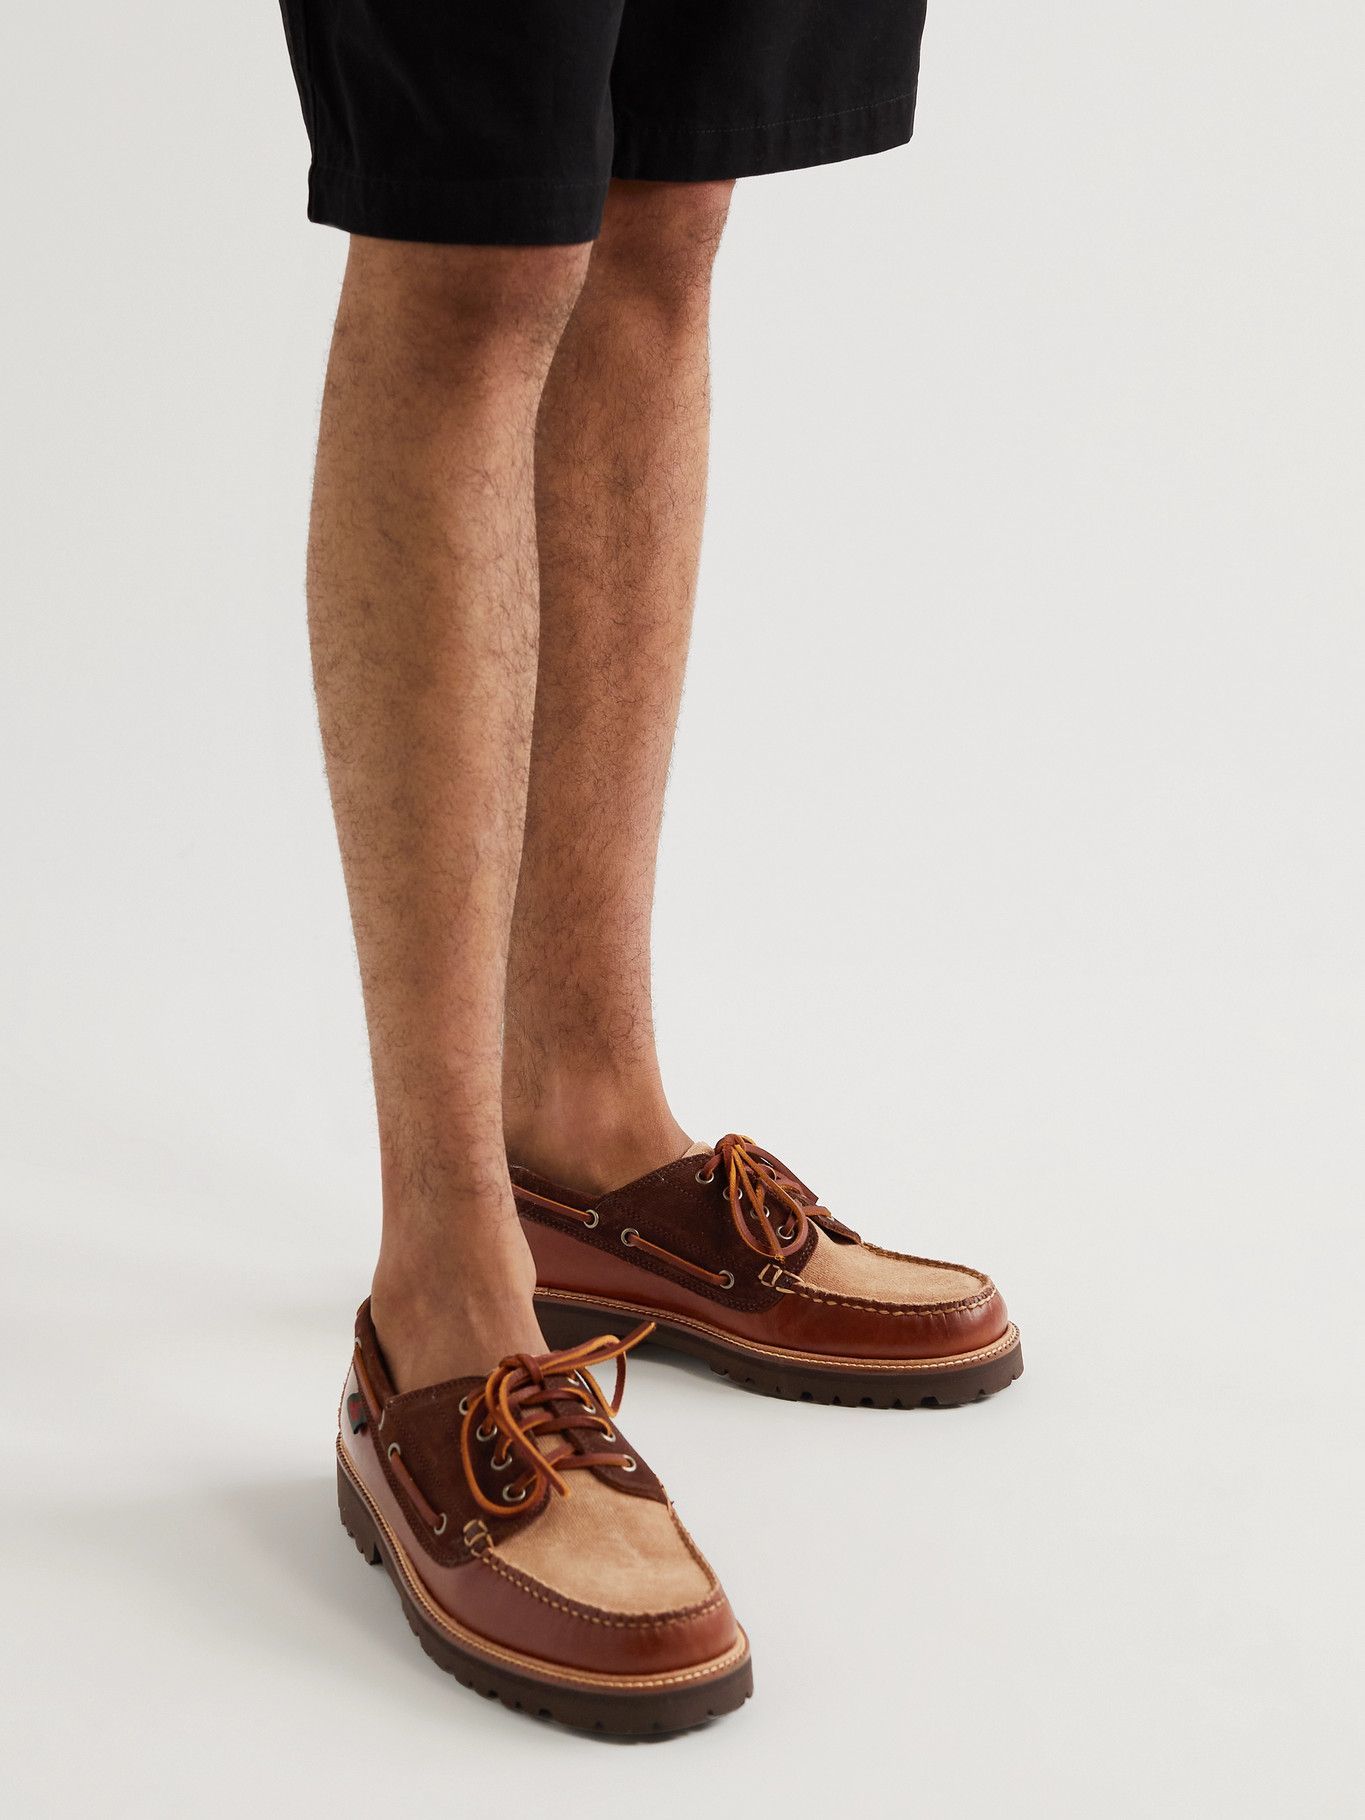 . Bass & Co. - Weejuns '90 Boater Mix Panelled Leather and Suede Boat  Shoes - Brown . Bass & Co.